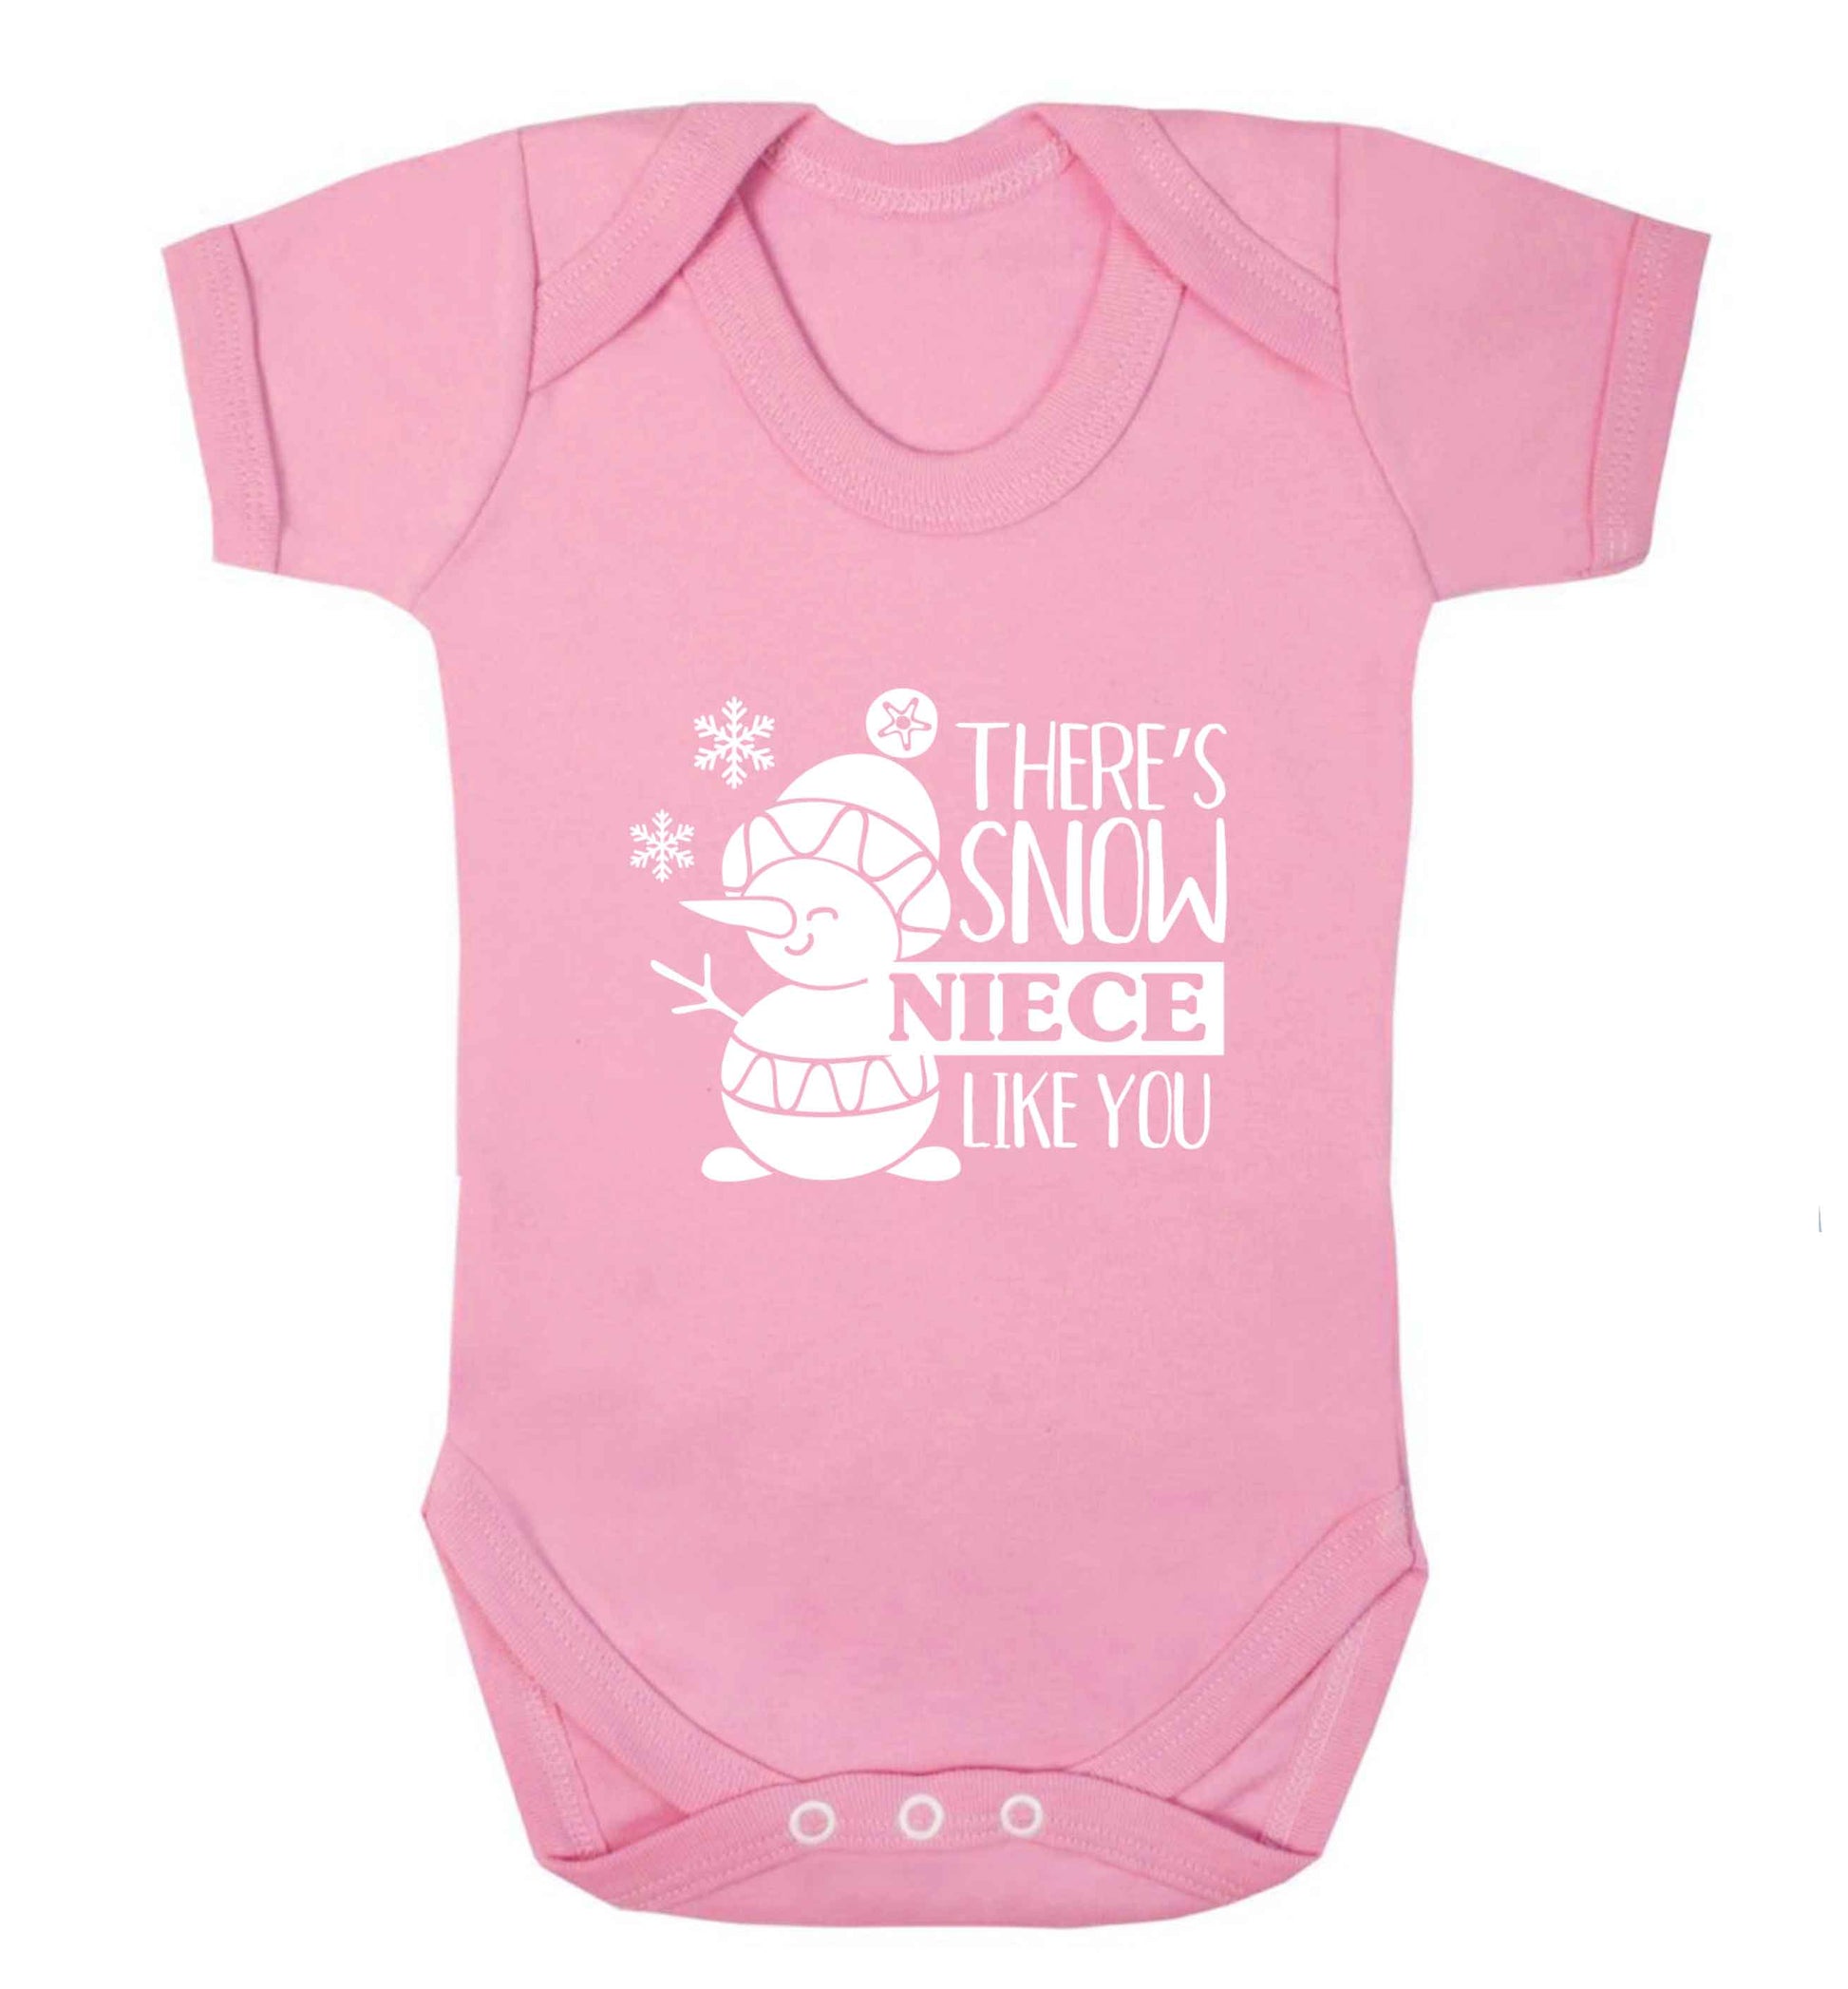 There's snow niece like you baby vest pale pink 18-24 months